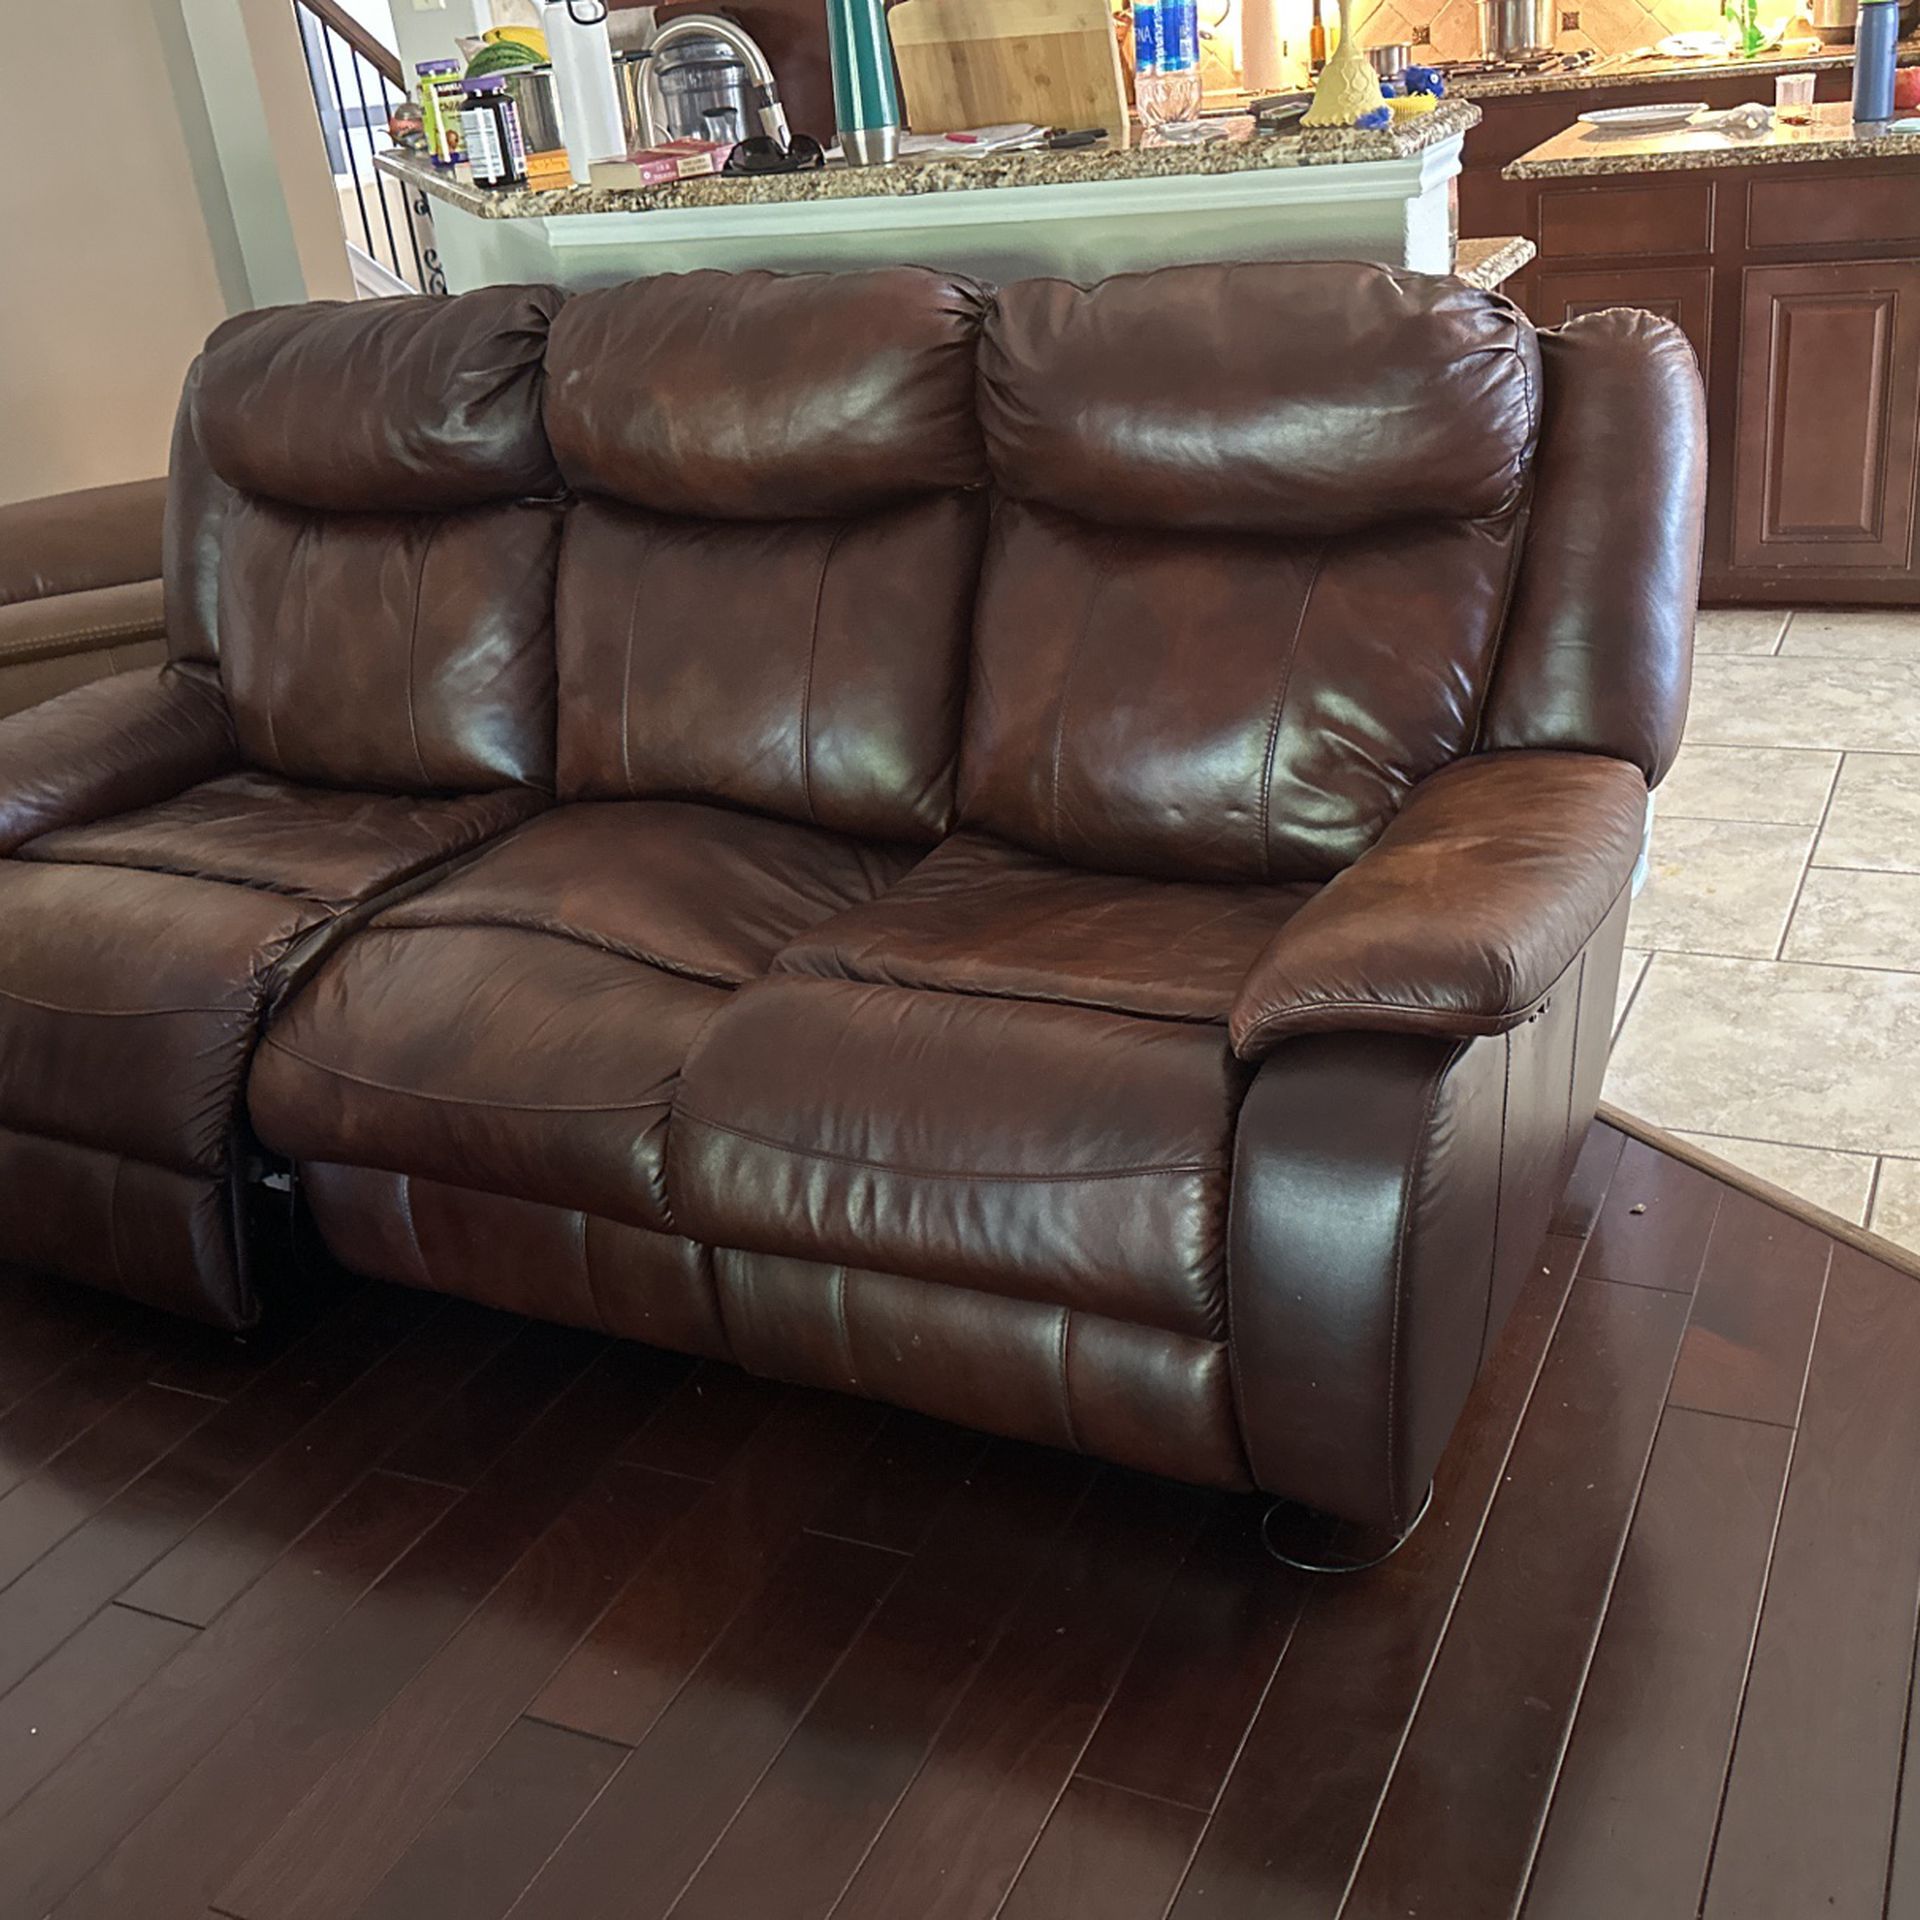 3 Seater Leather Couch for Free